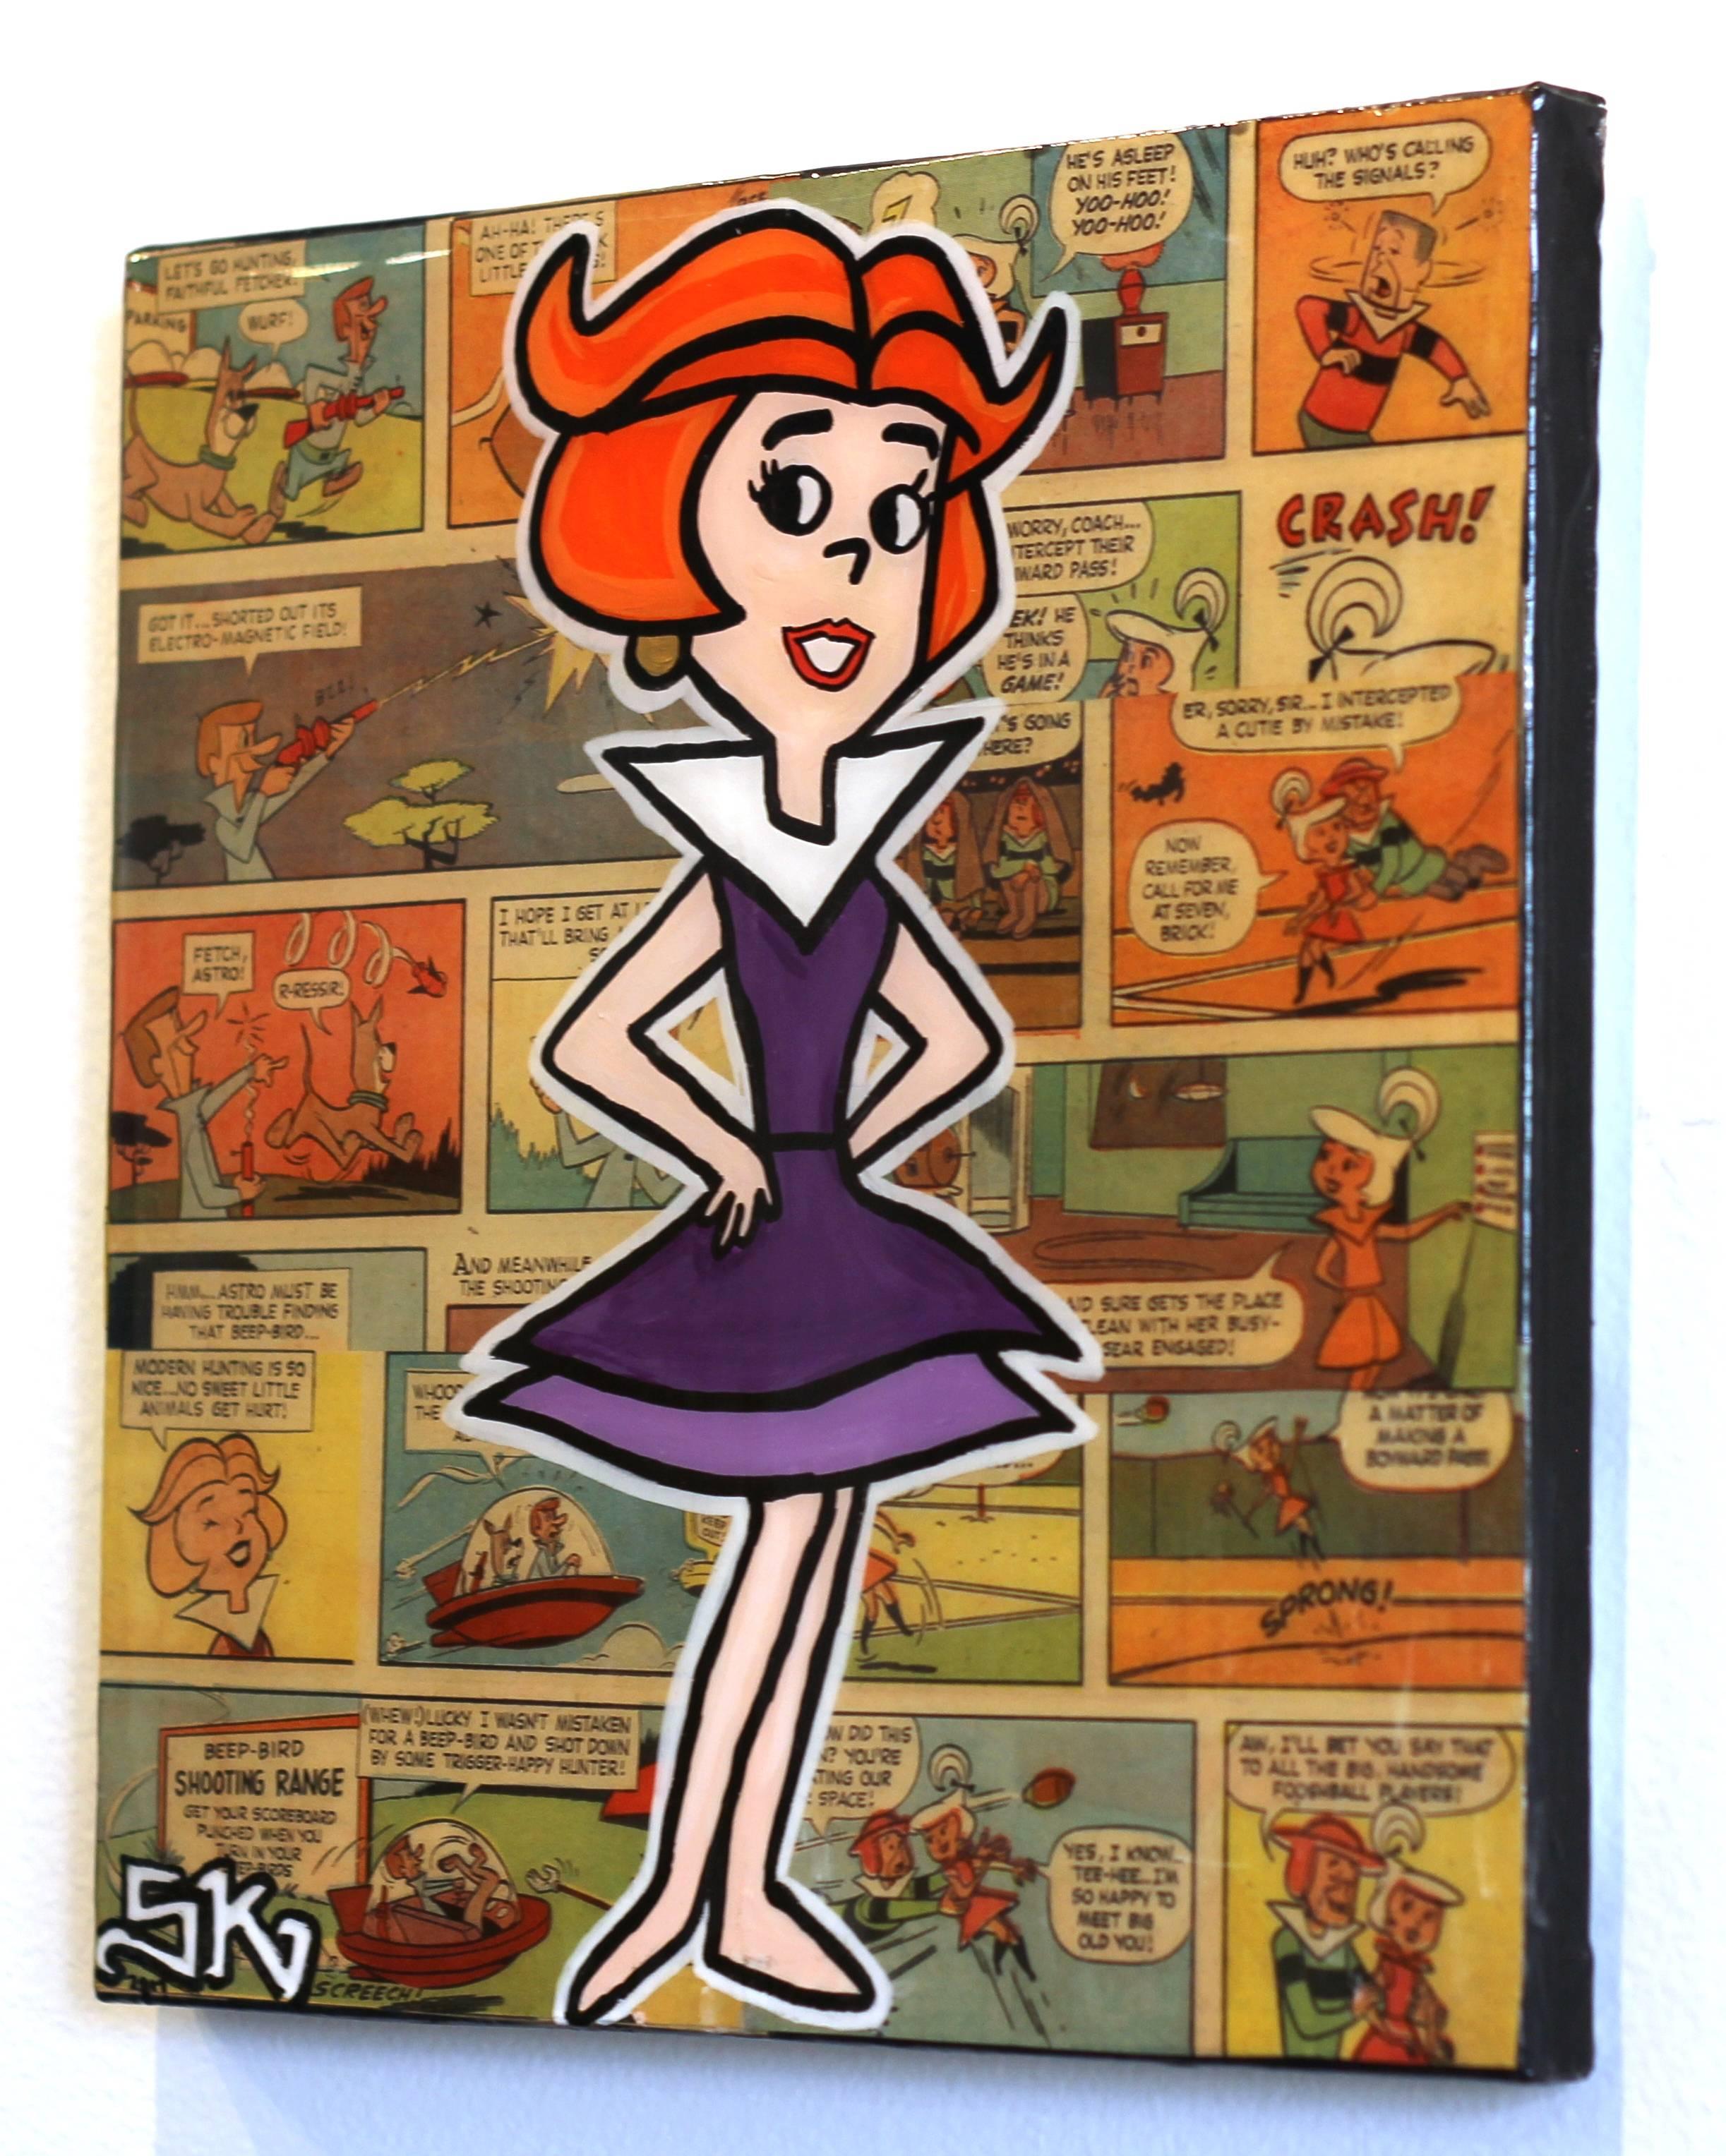 Meet the Jetsons: Jane - Brown Figurative Painting by Sean Keith